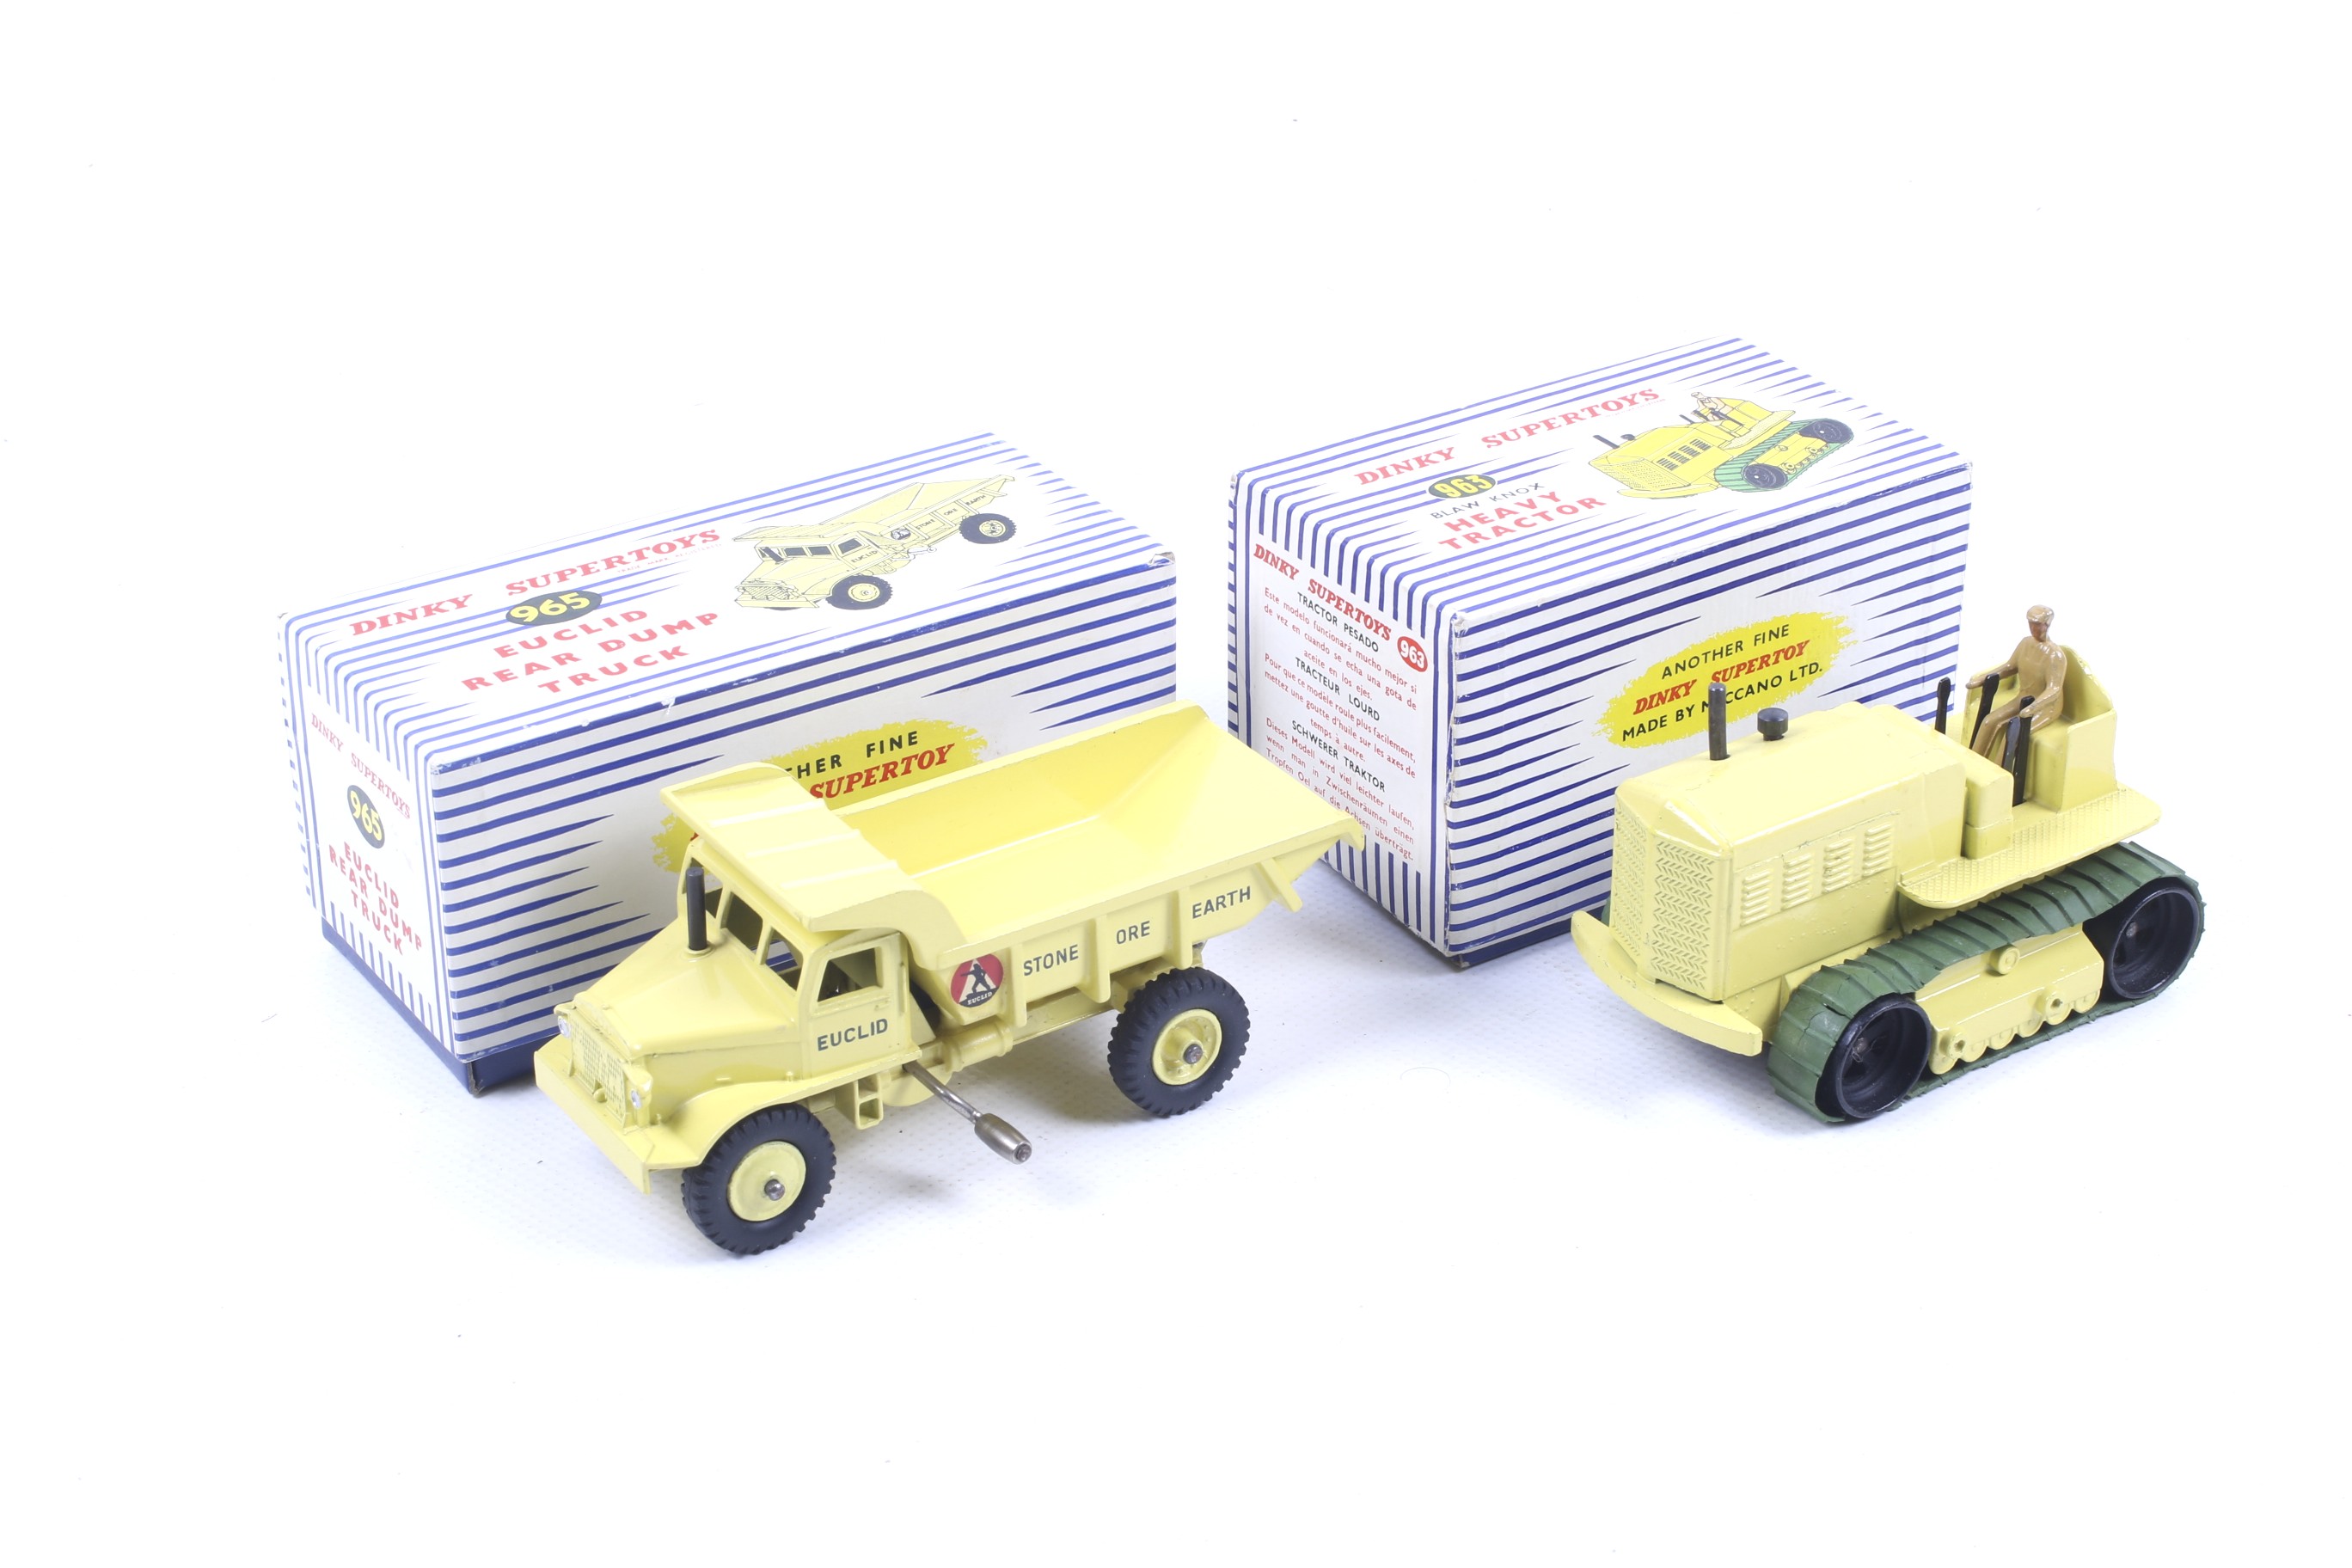 Two Dinky Supertoys diecast toys. Comprising one Euclid rear dump truck no.